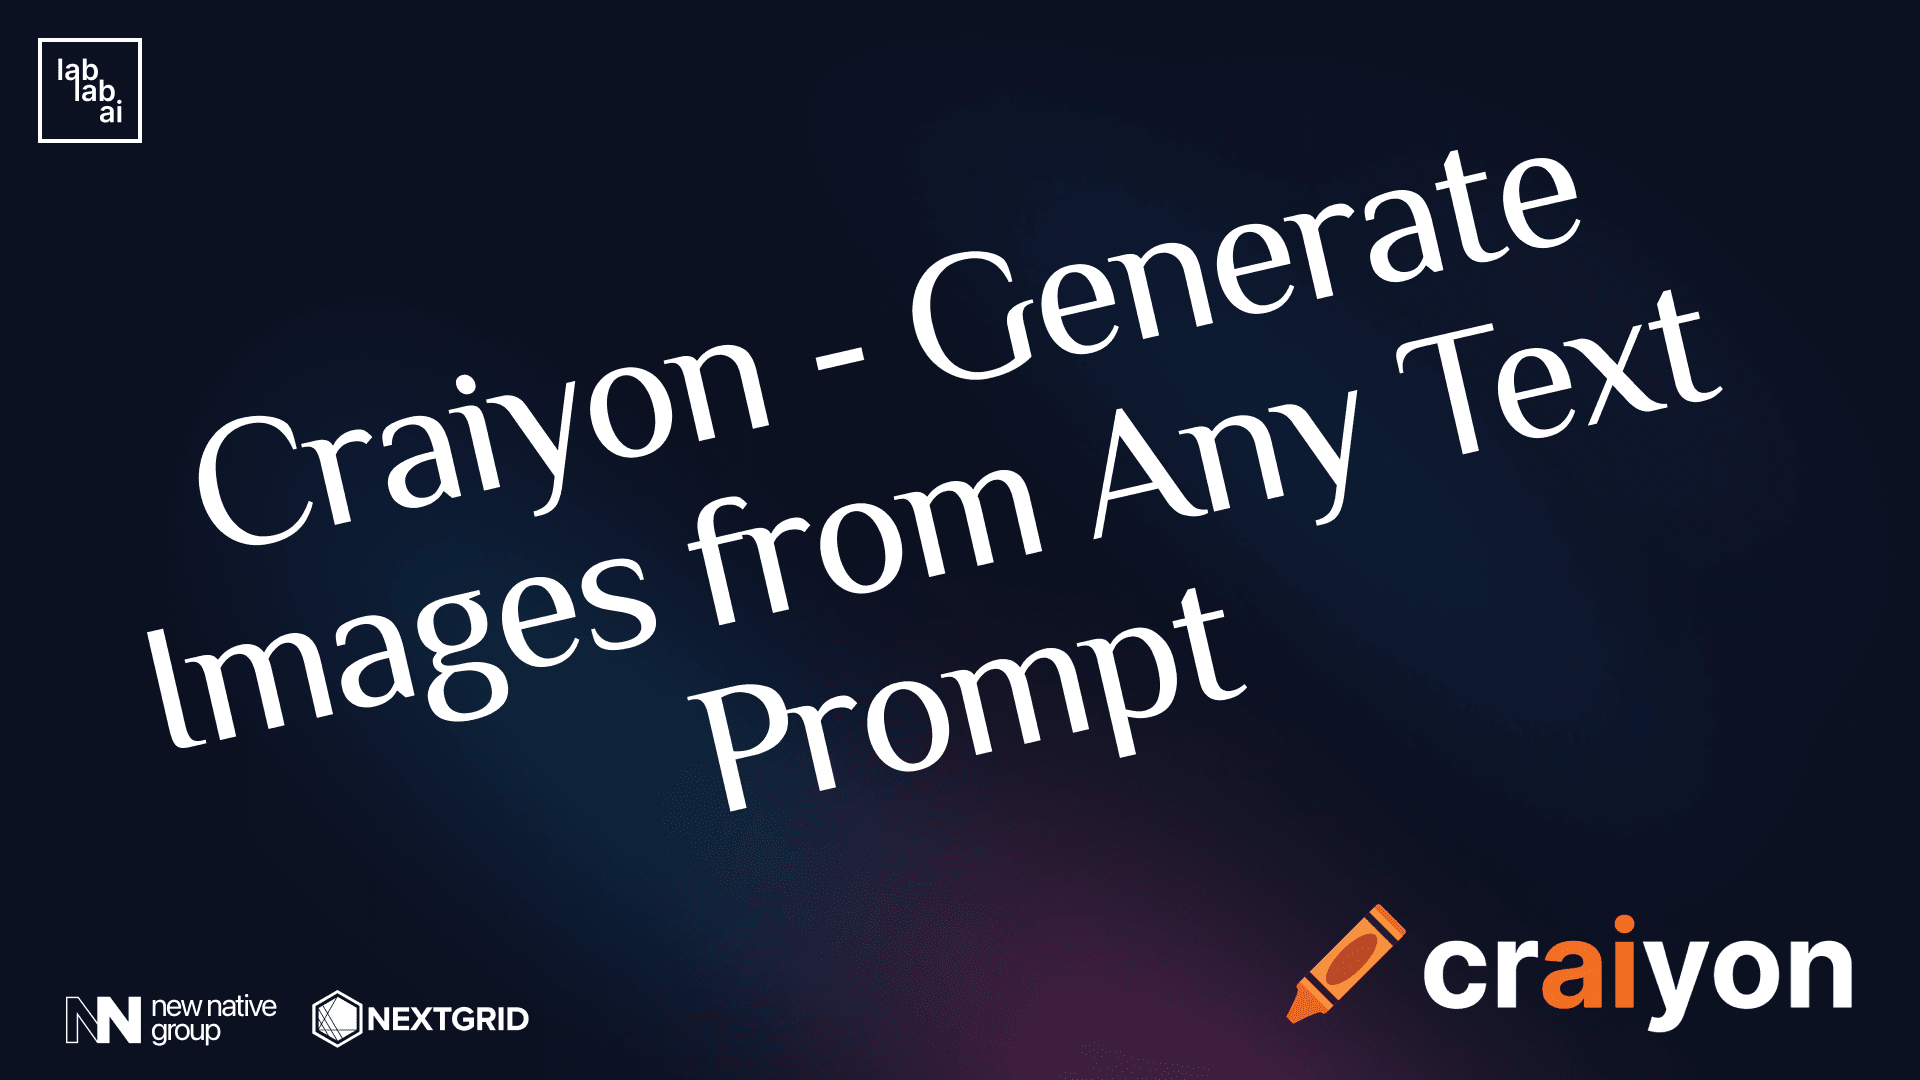 Free AI art Generator tutorial: Craiyon - Generate Images From Any Text Prompt